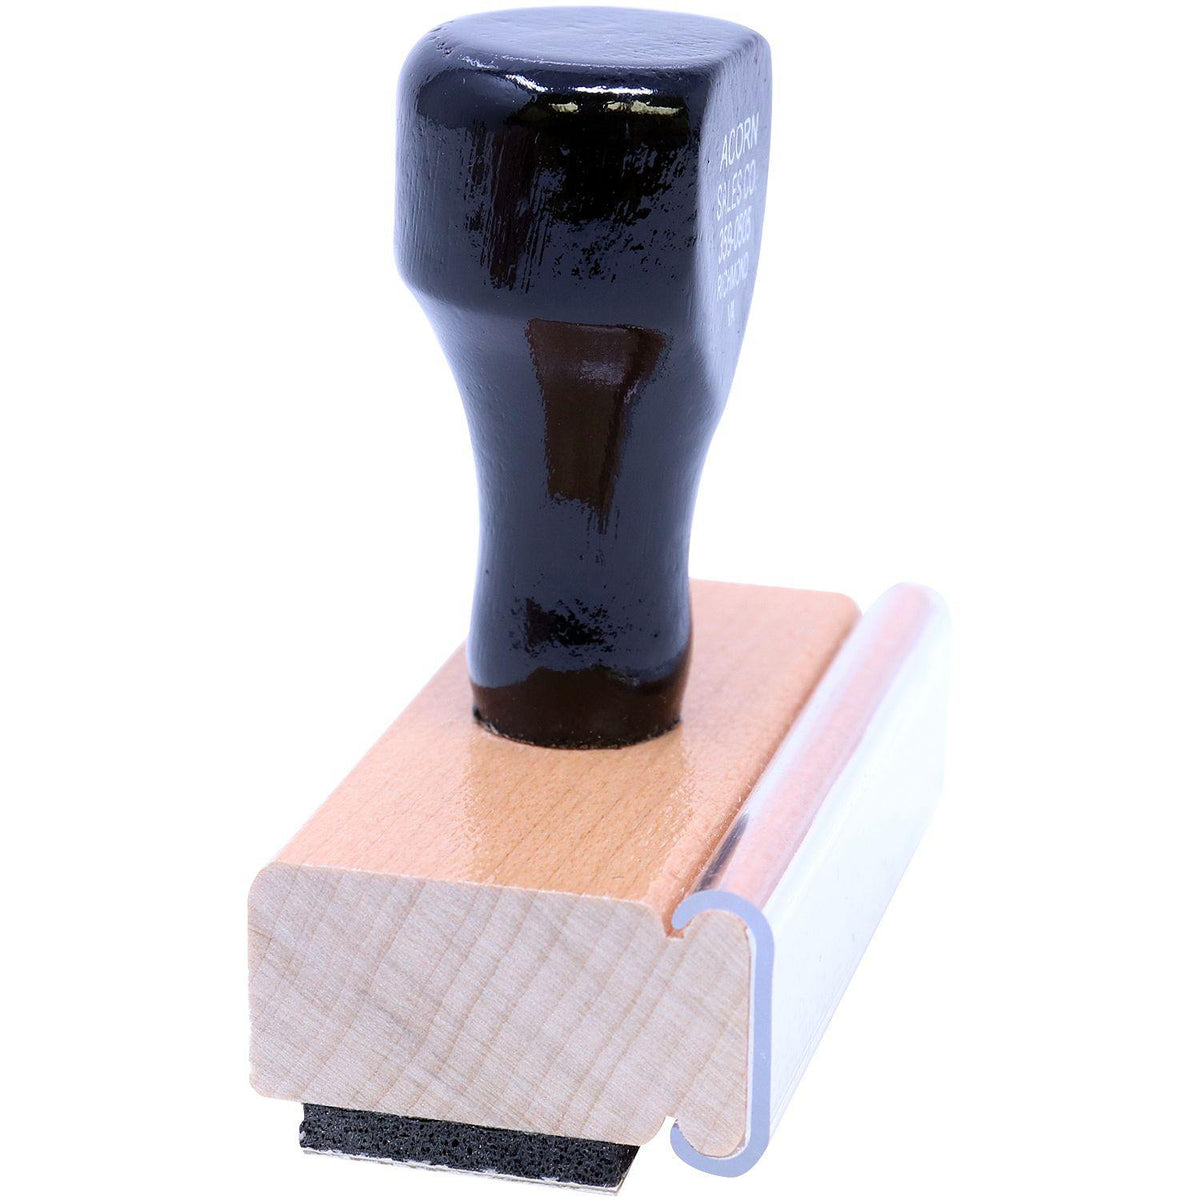 Side View of Faxed with Machine Rubber Stamp at an Angle